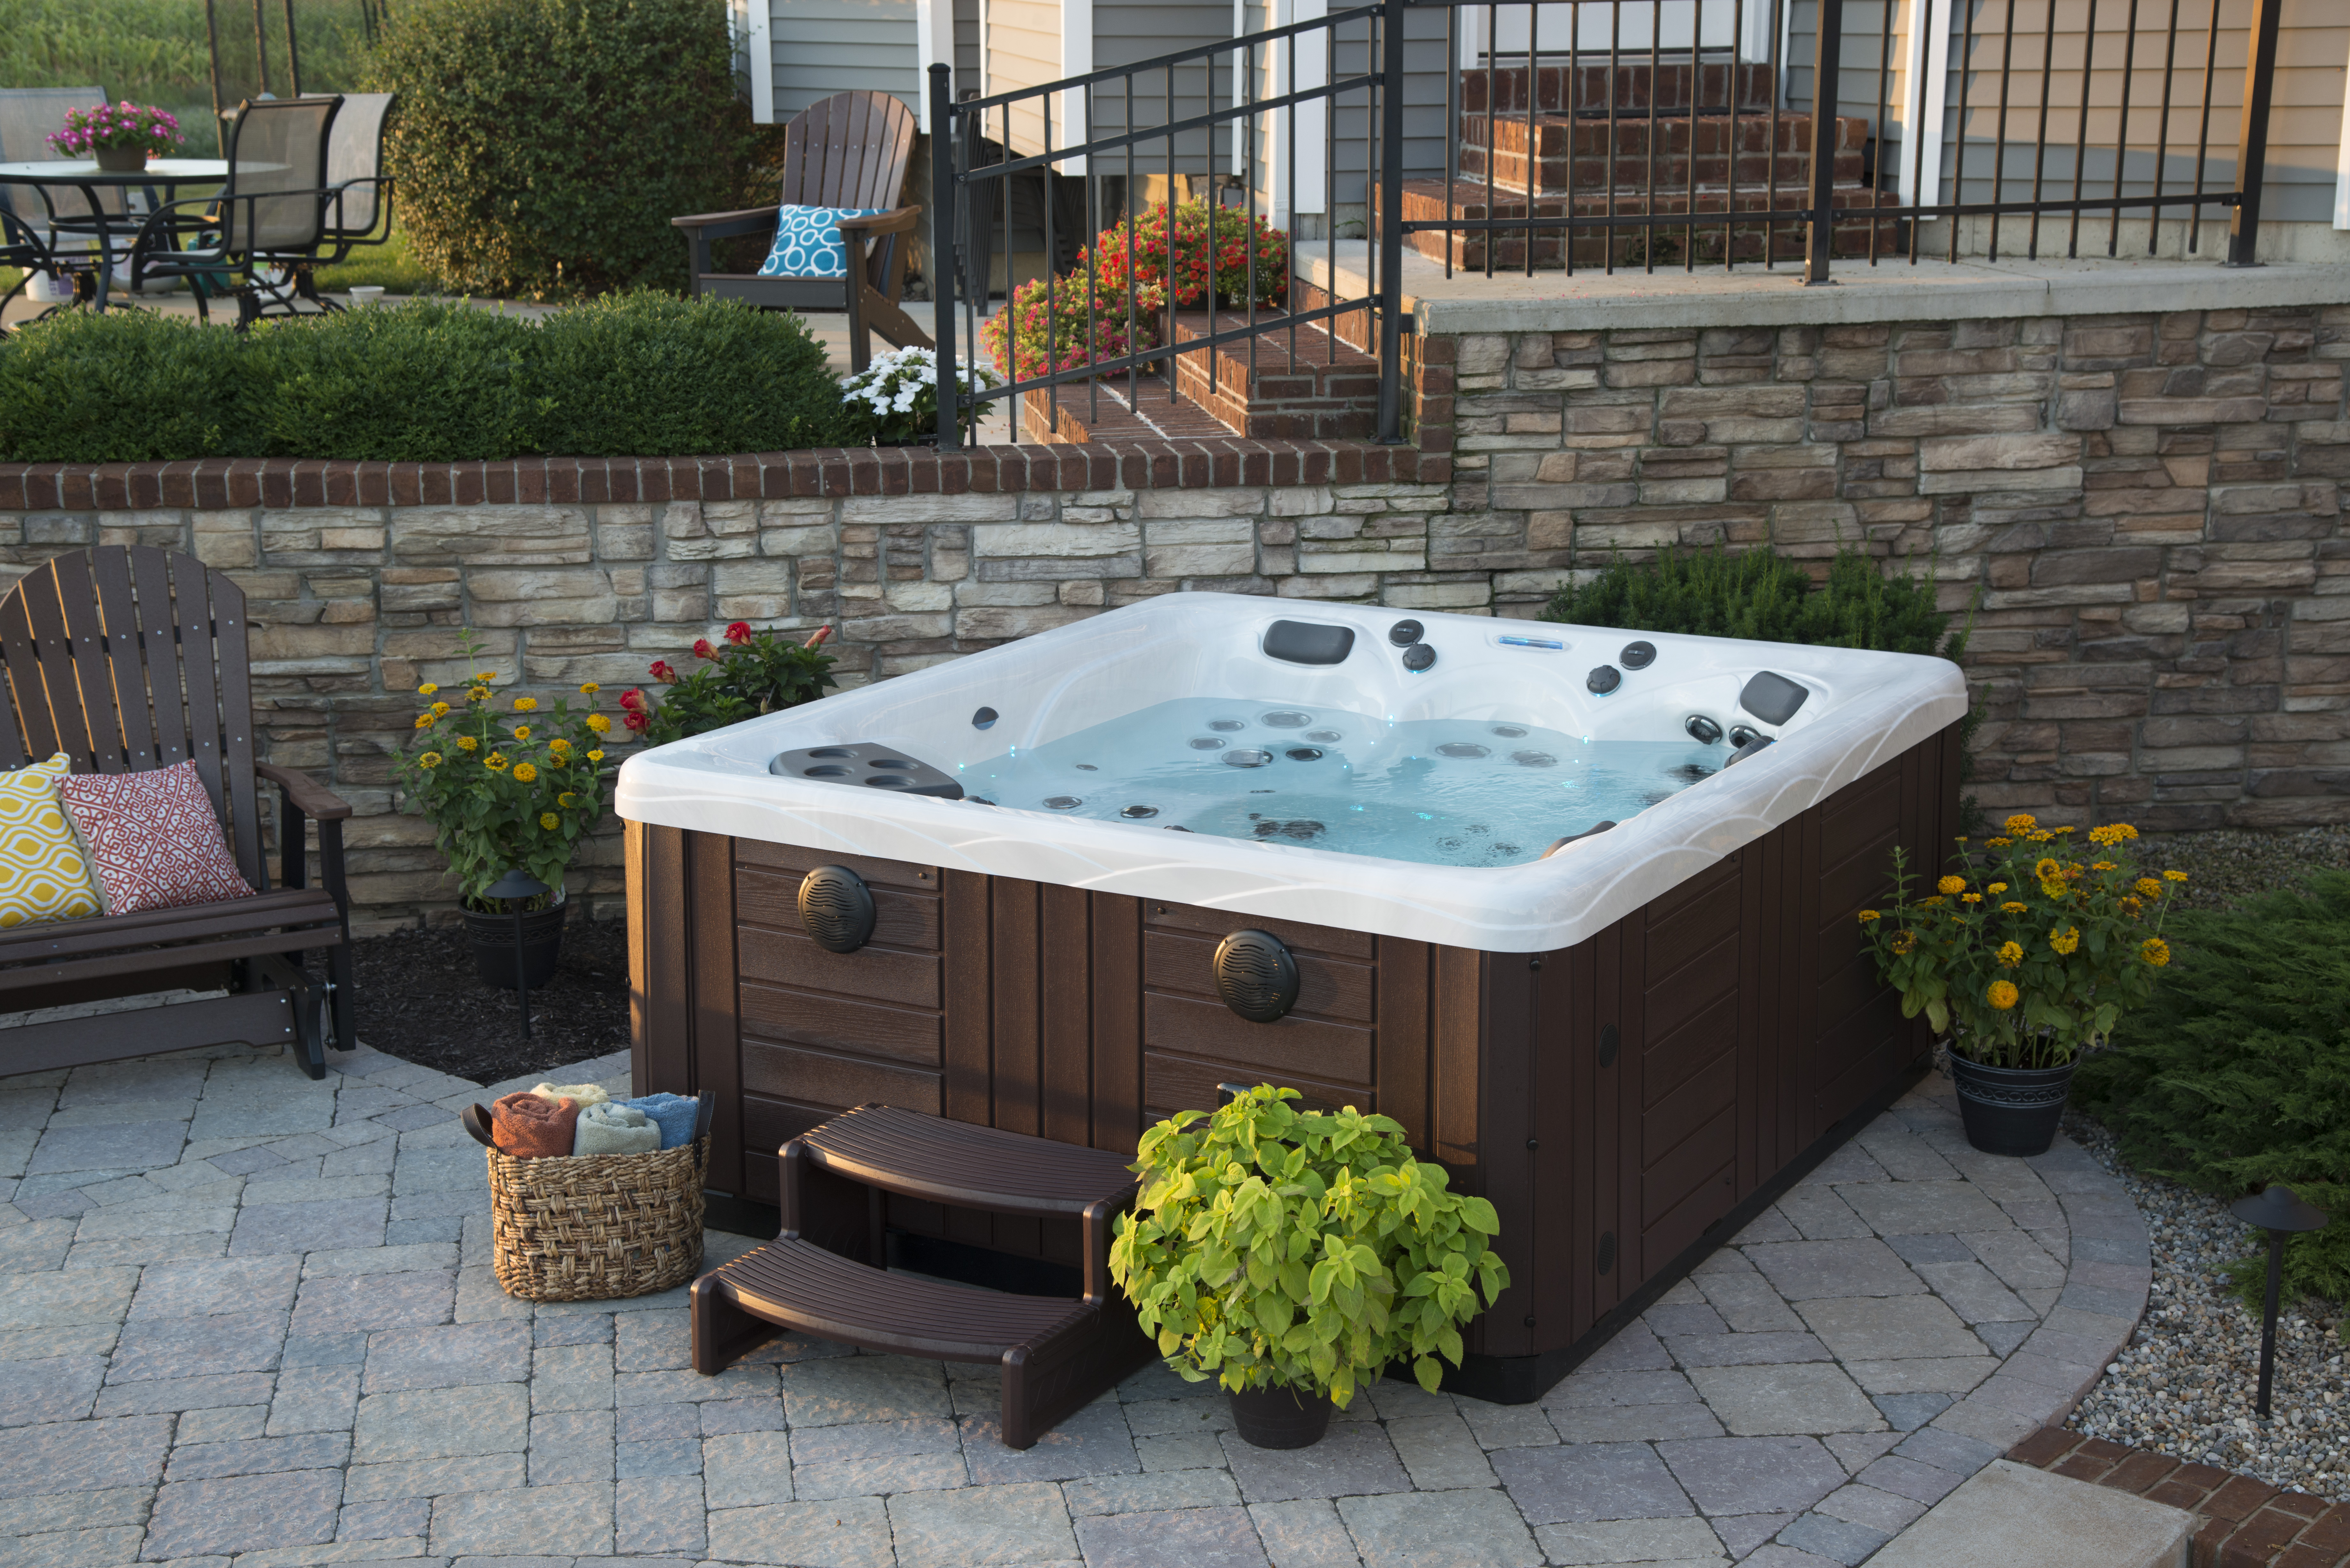 What Do You Want how to get hot tub in backyard To Become?